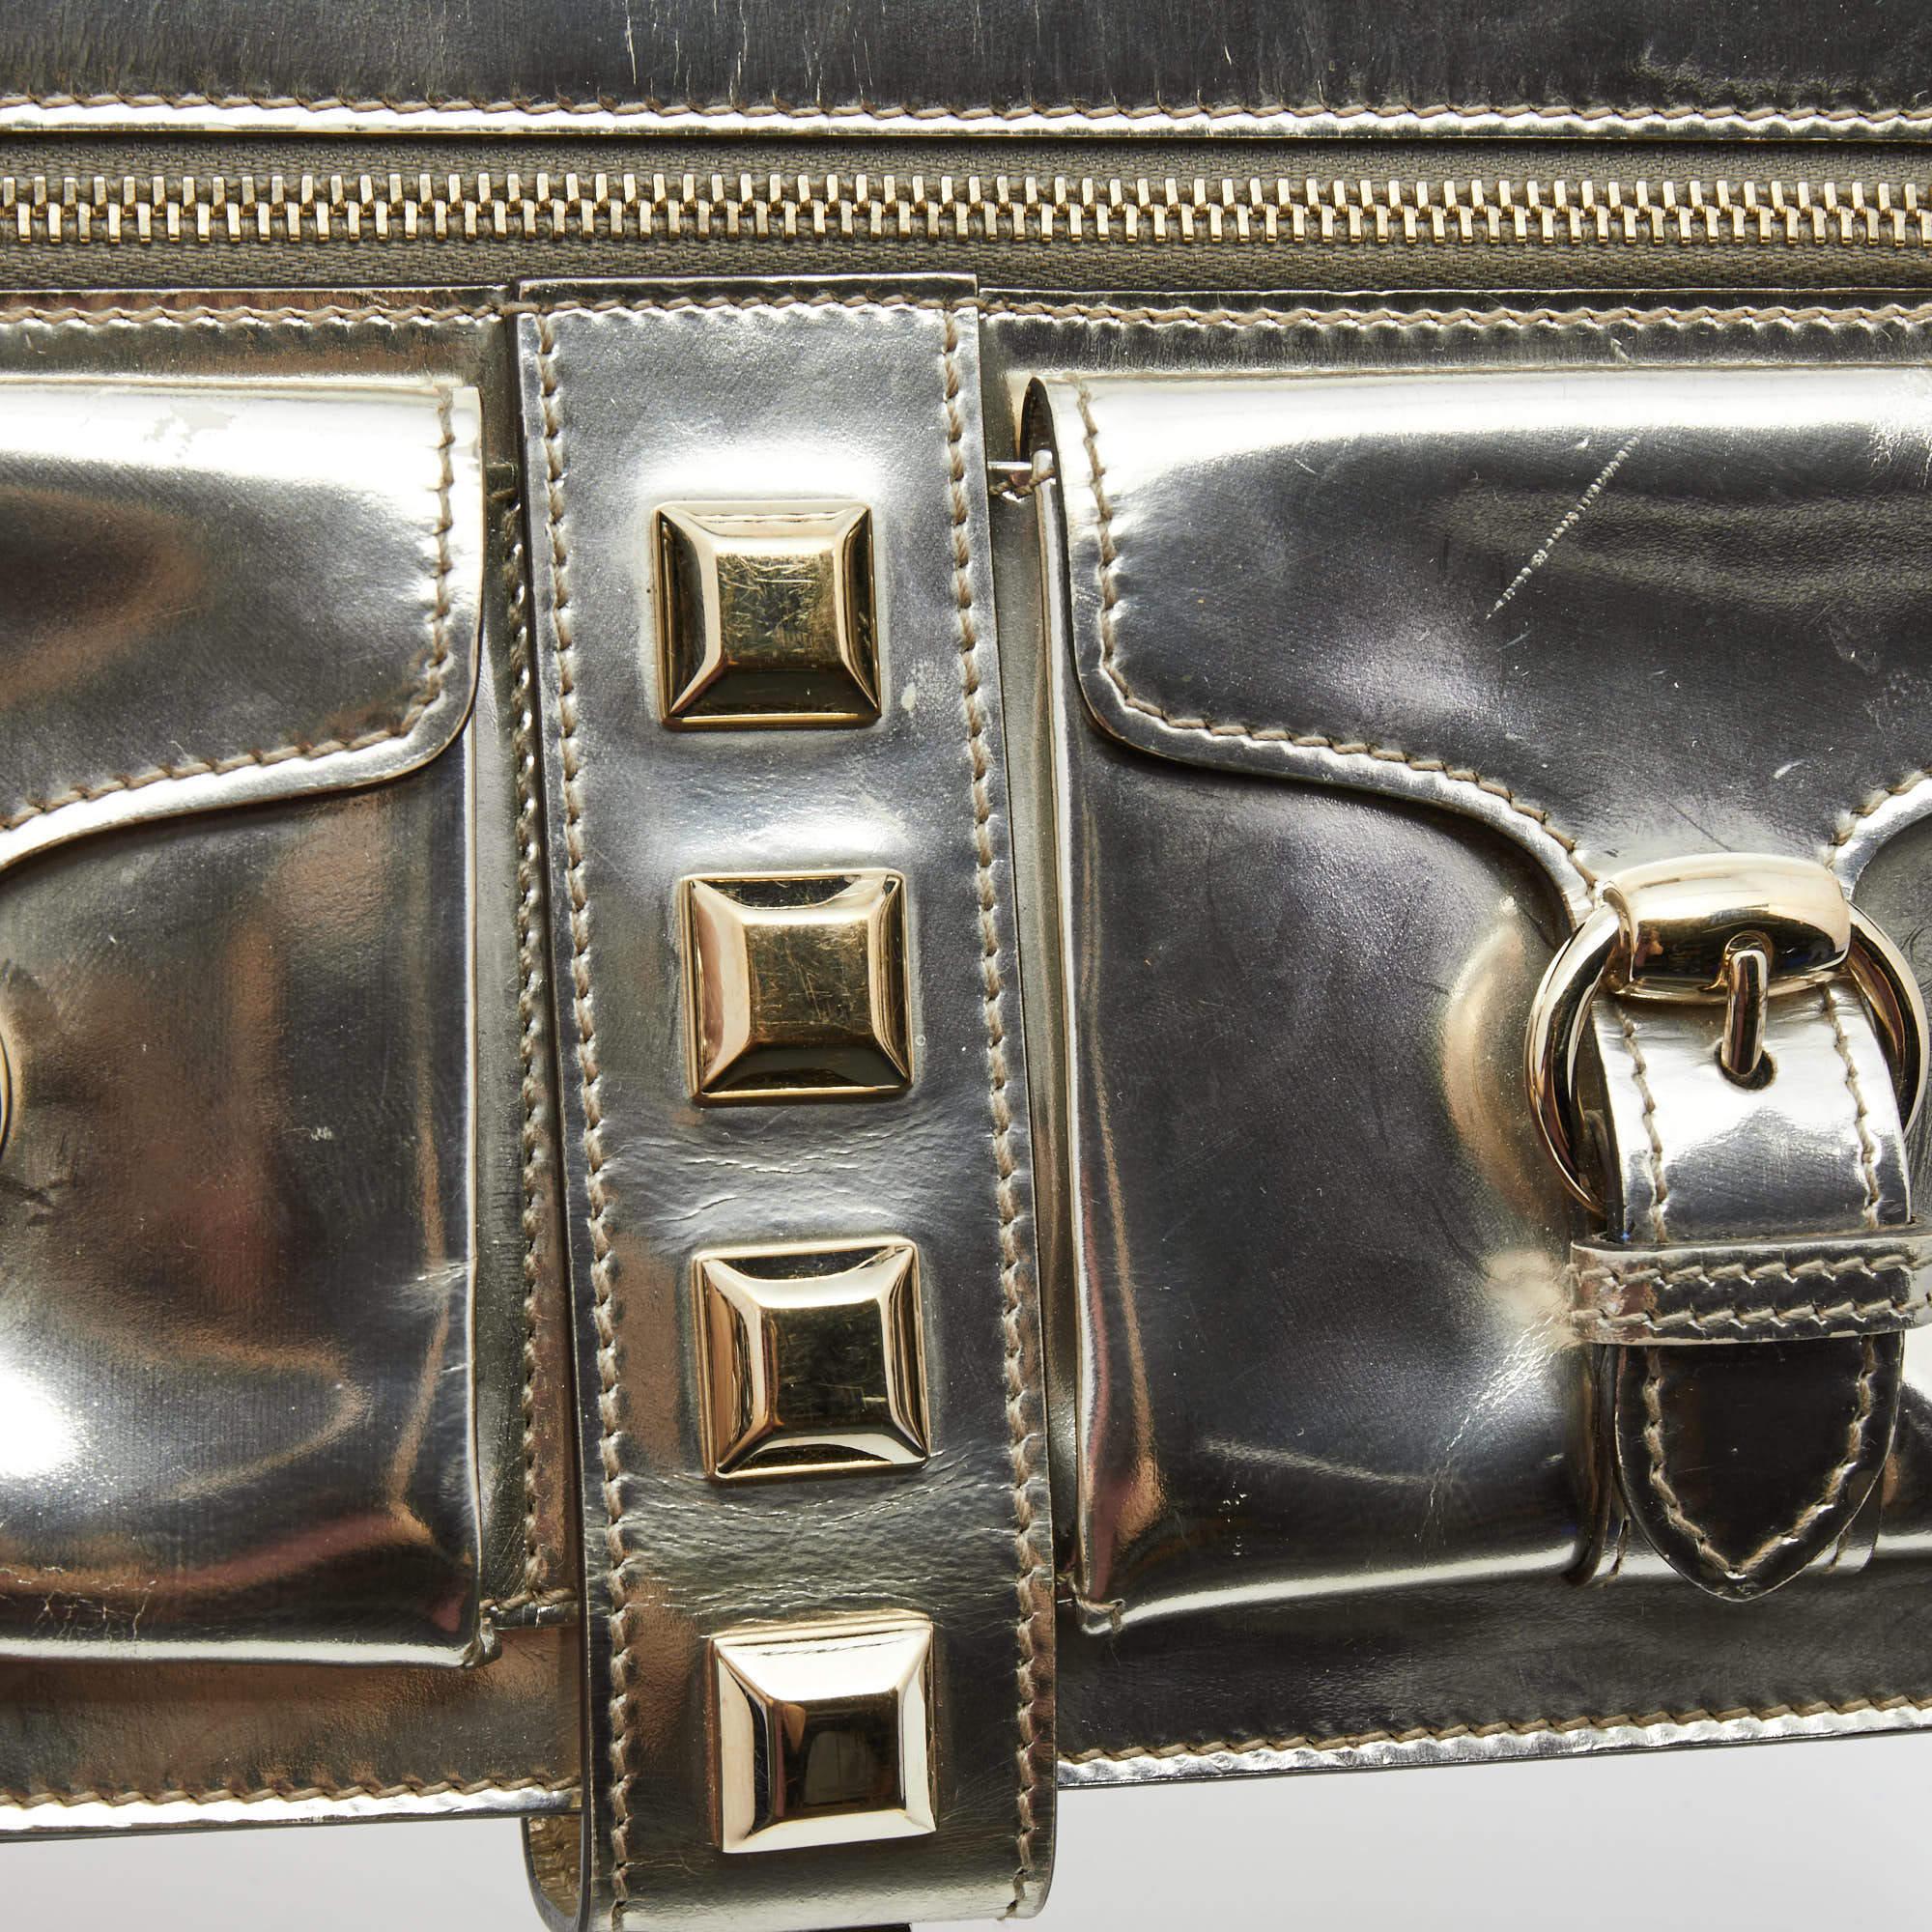 Gucci Metallic Gold Laminate Leather Studded Evening Wristlet Clutch For Sale 4